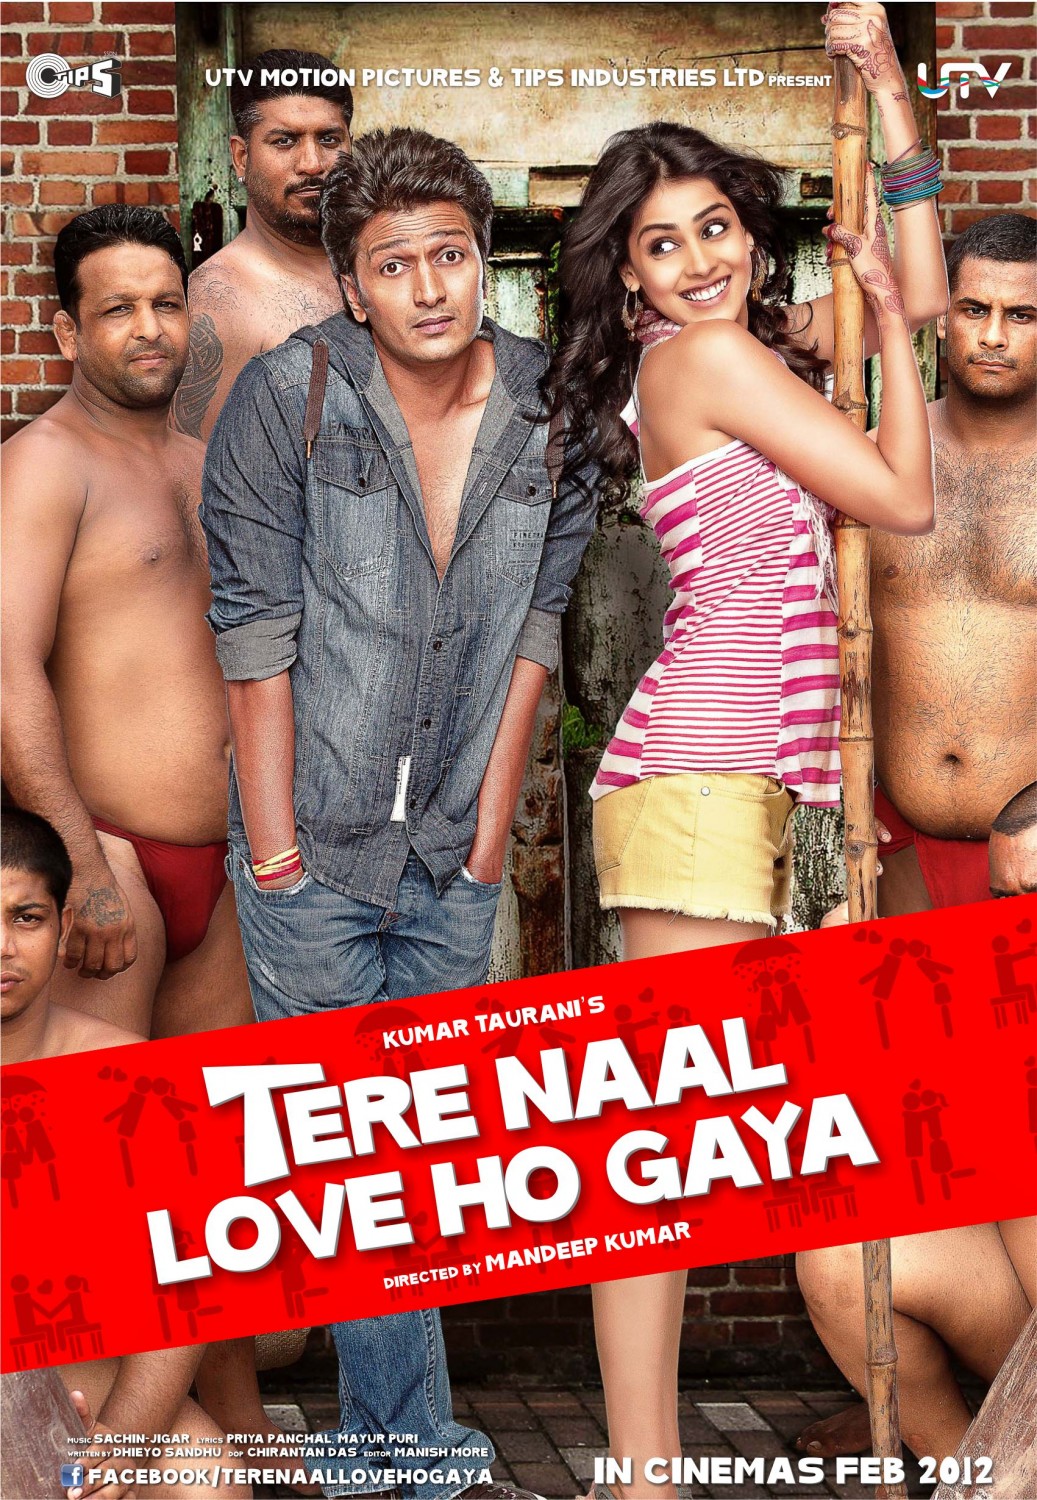 Extra Large Movie Poster Image for Tere Naal Love Ho Gaya (#5 of 5)